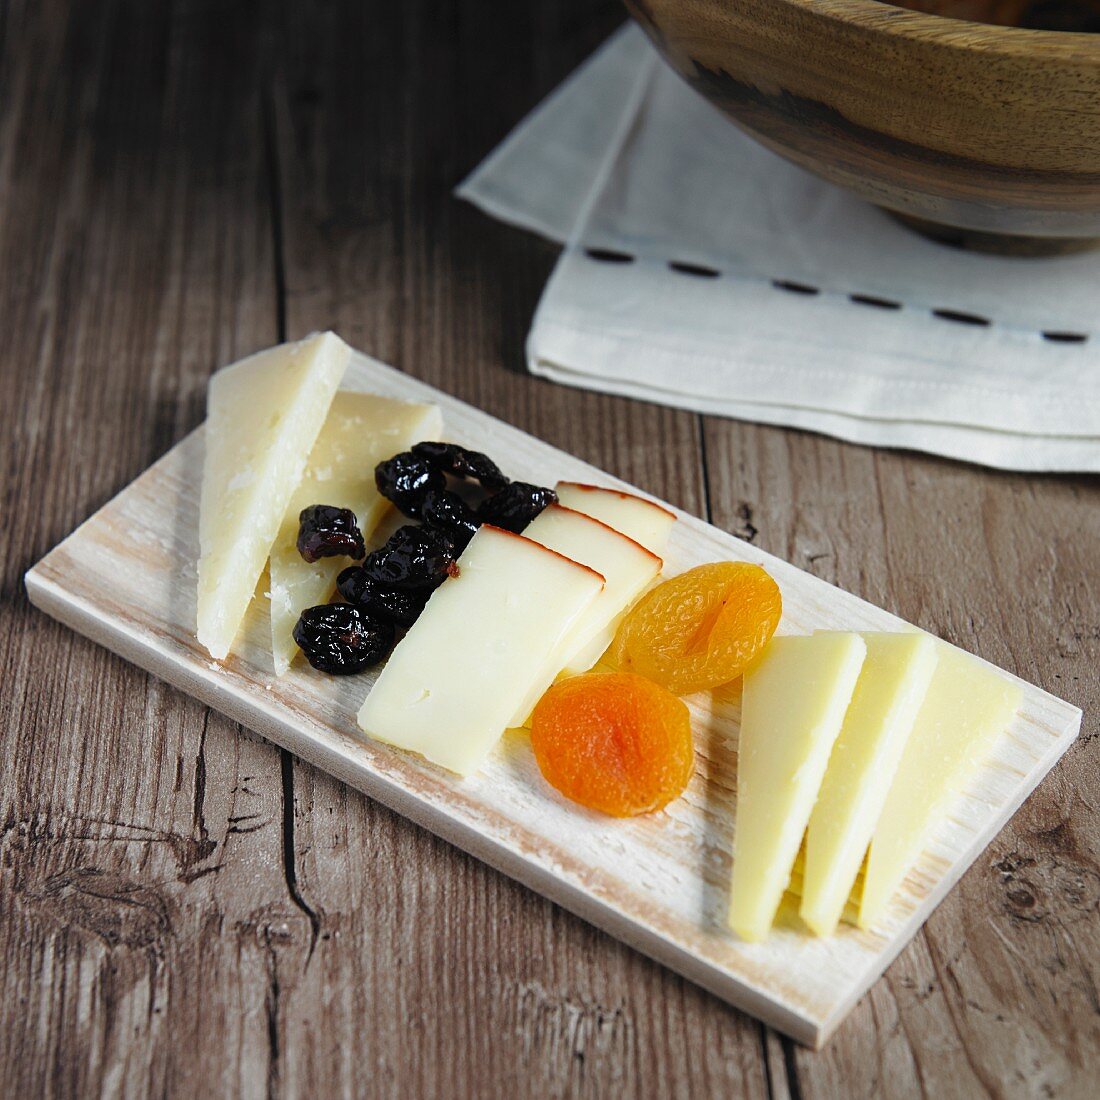 A cheese platter with dried fruits